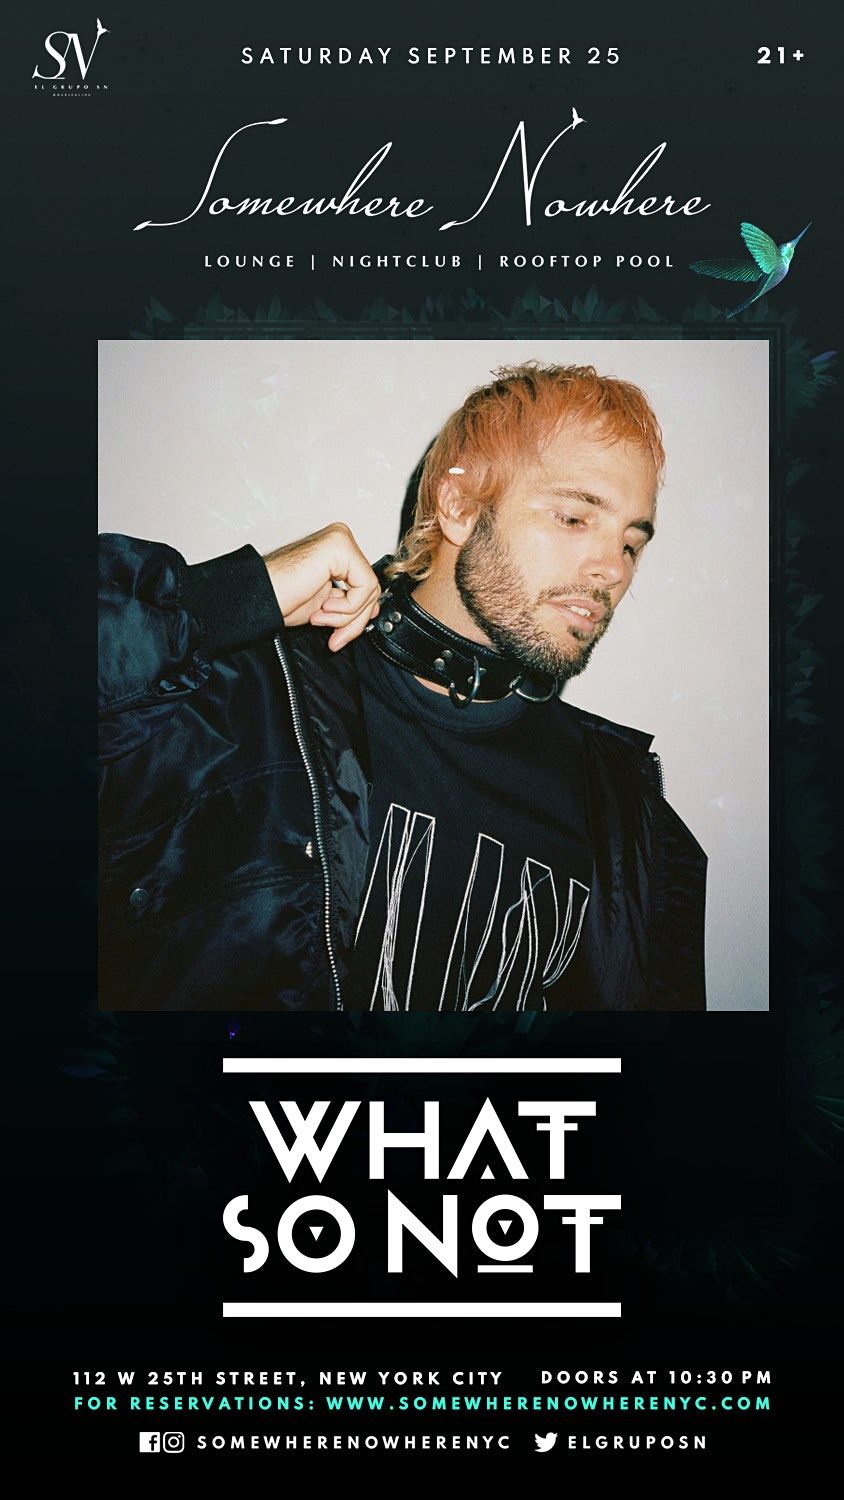 What So Not @ Somewhere Nowhere NYC (Saturday, September 25)